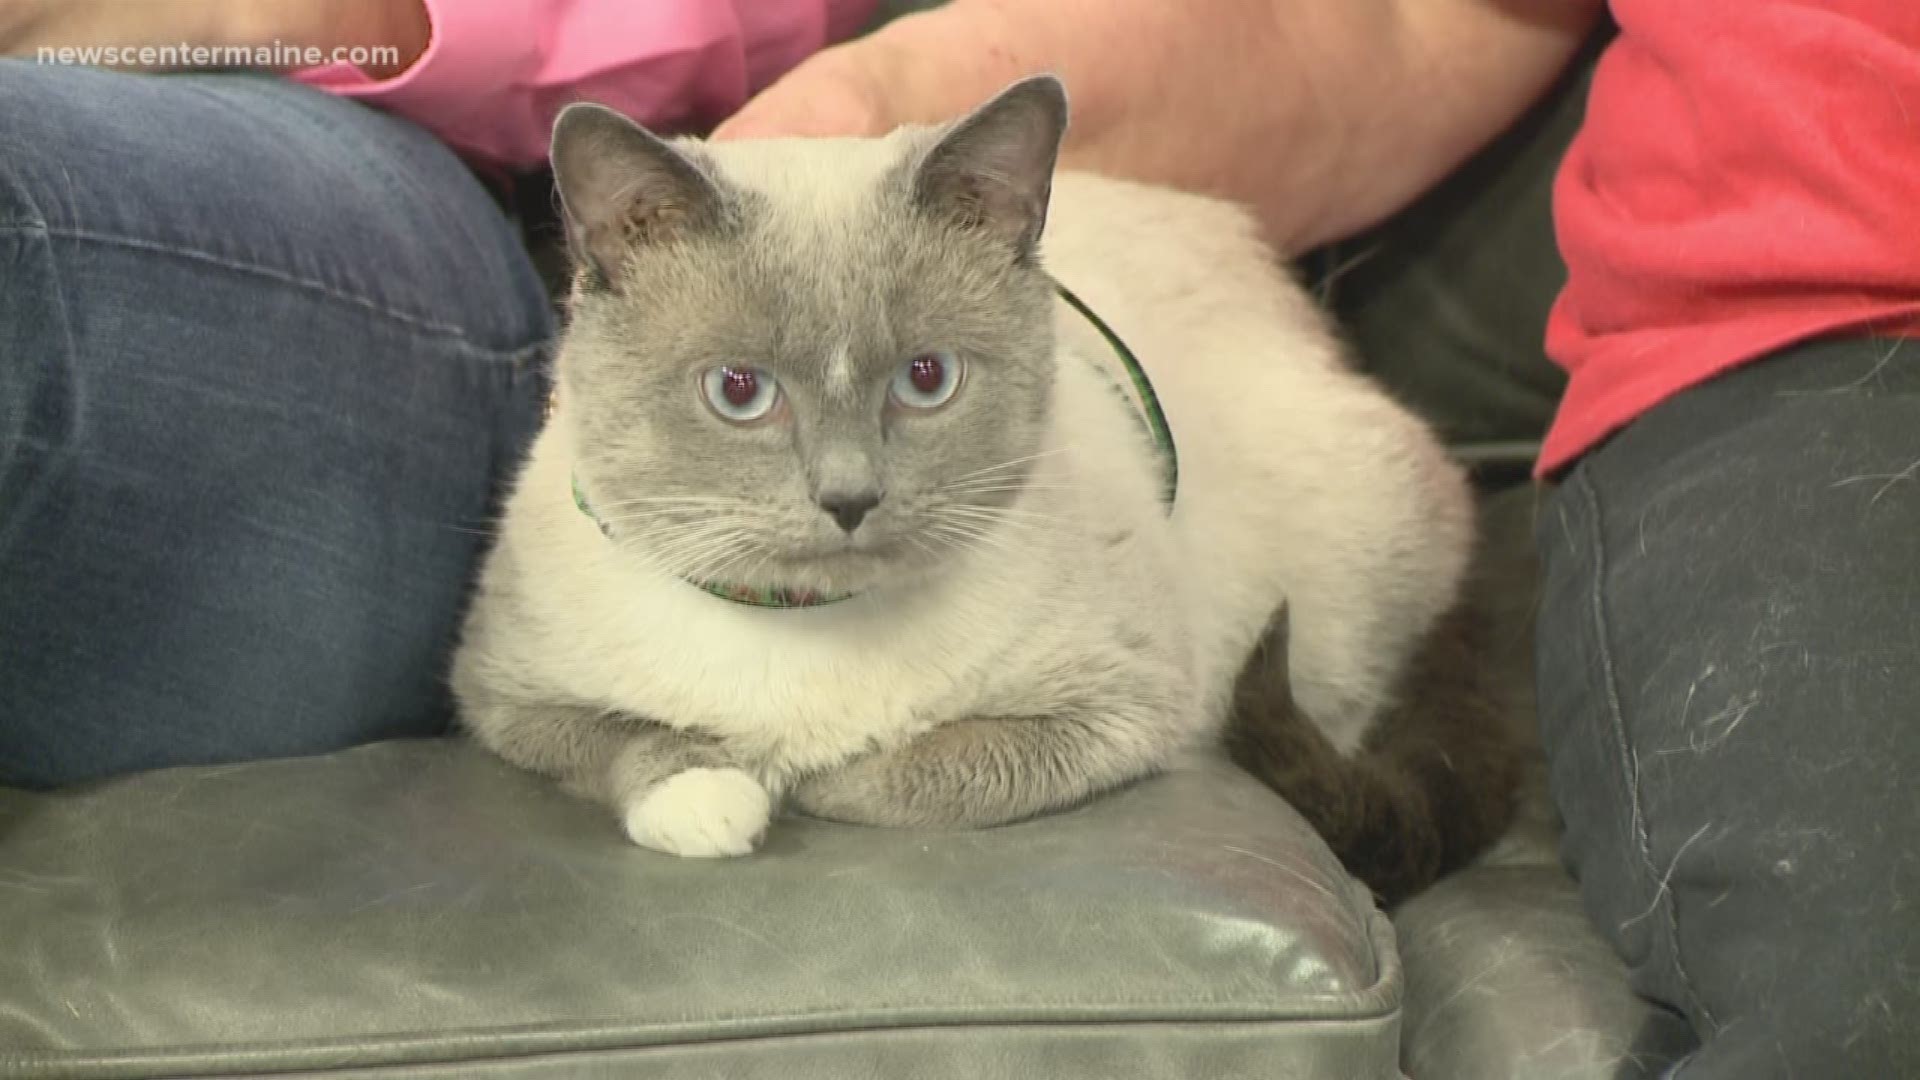 Ash the cat is available at HART of Maine. Ash is laid back and has beautiful blue eyes. His adoption fee is about $95.